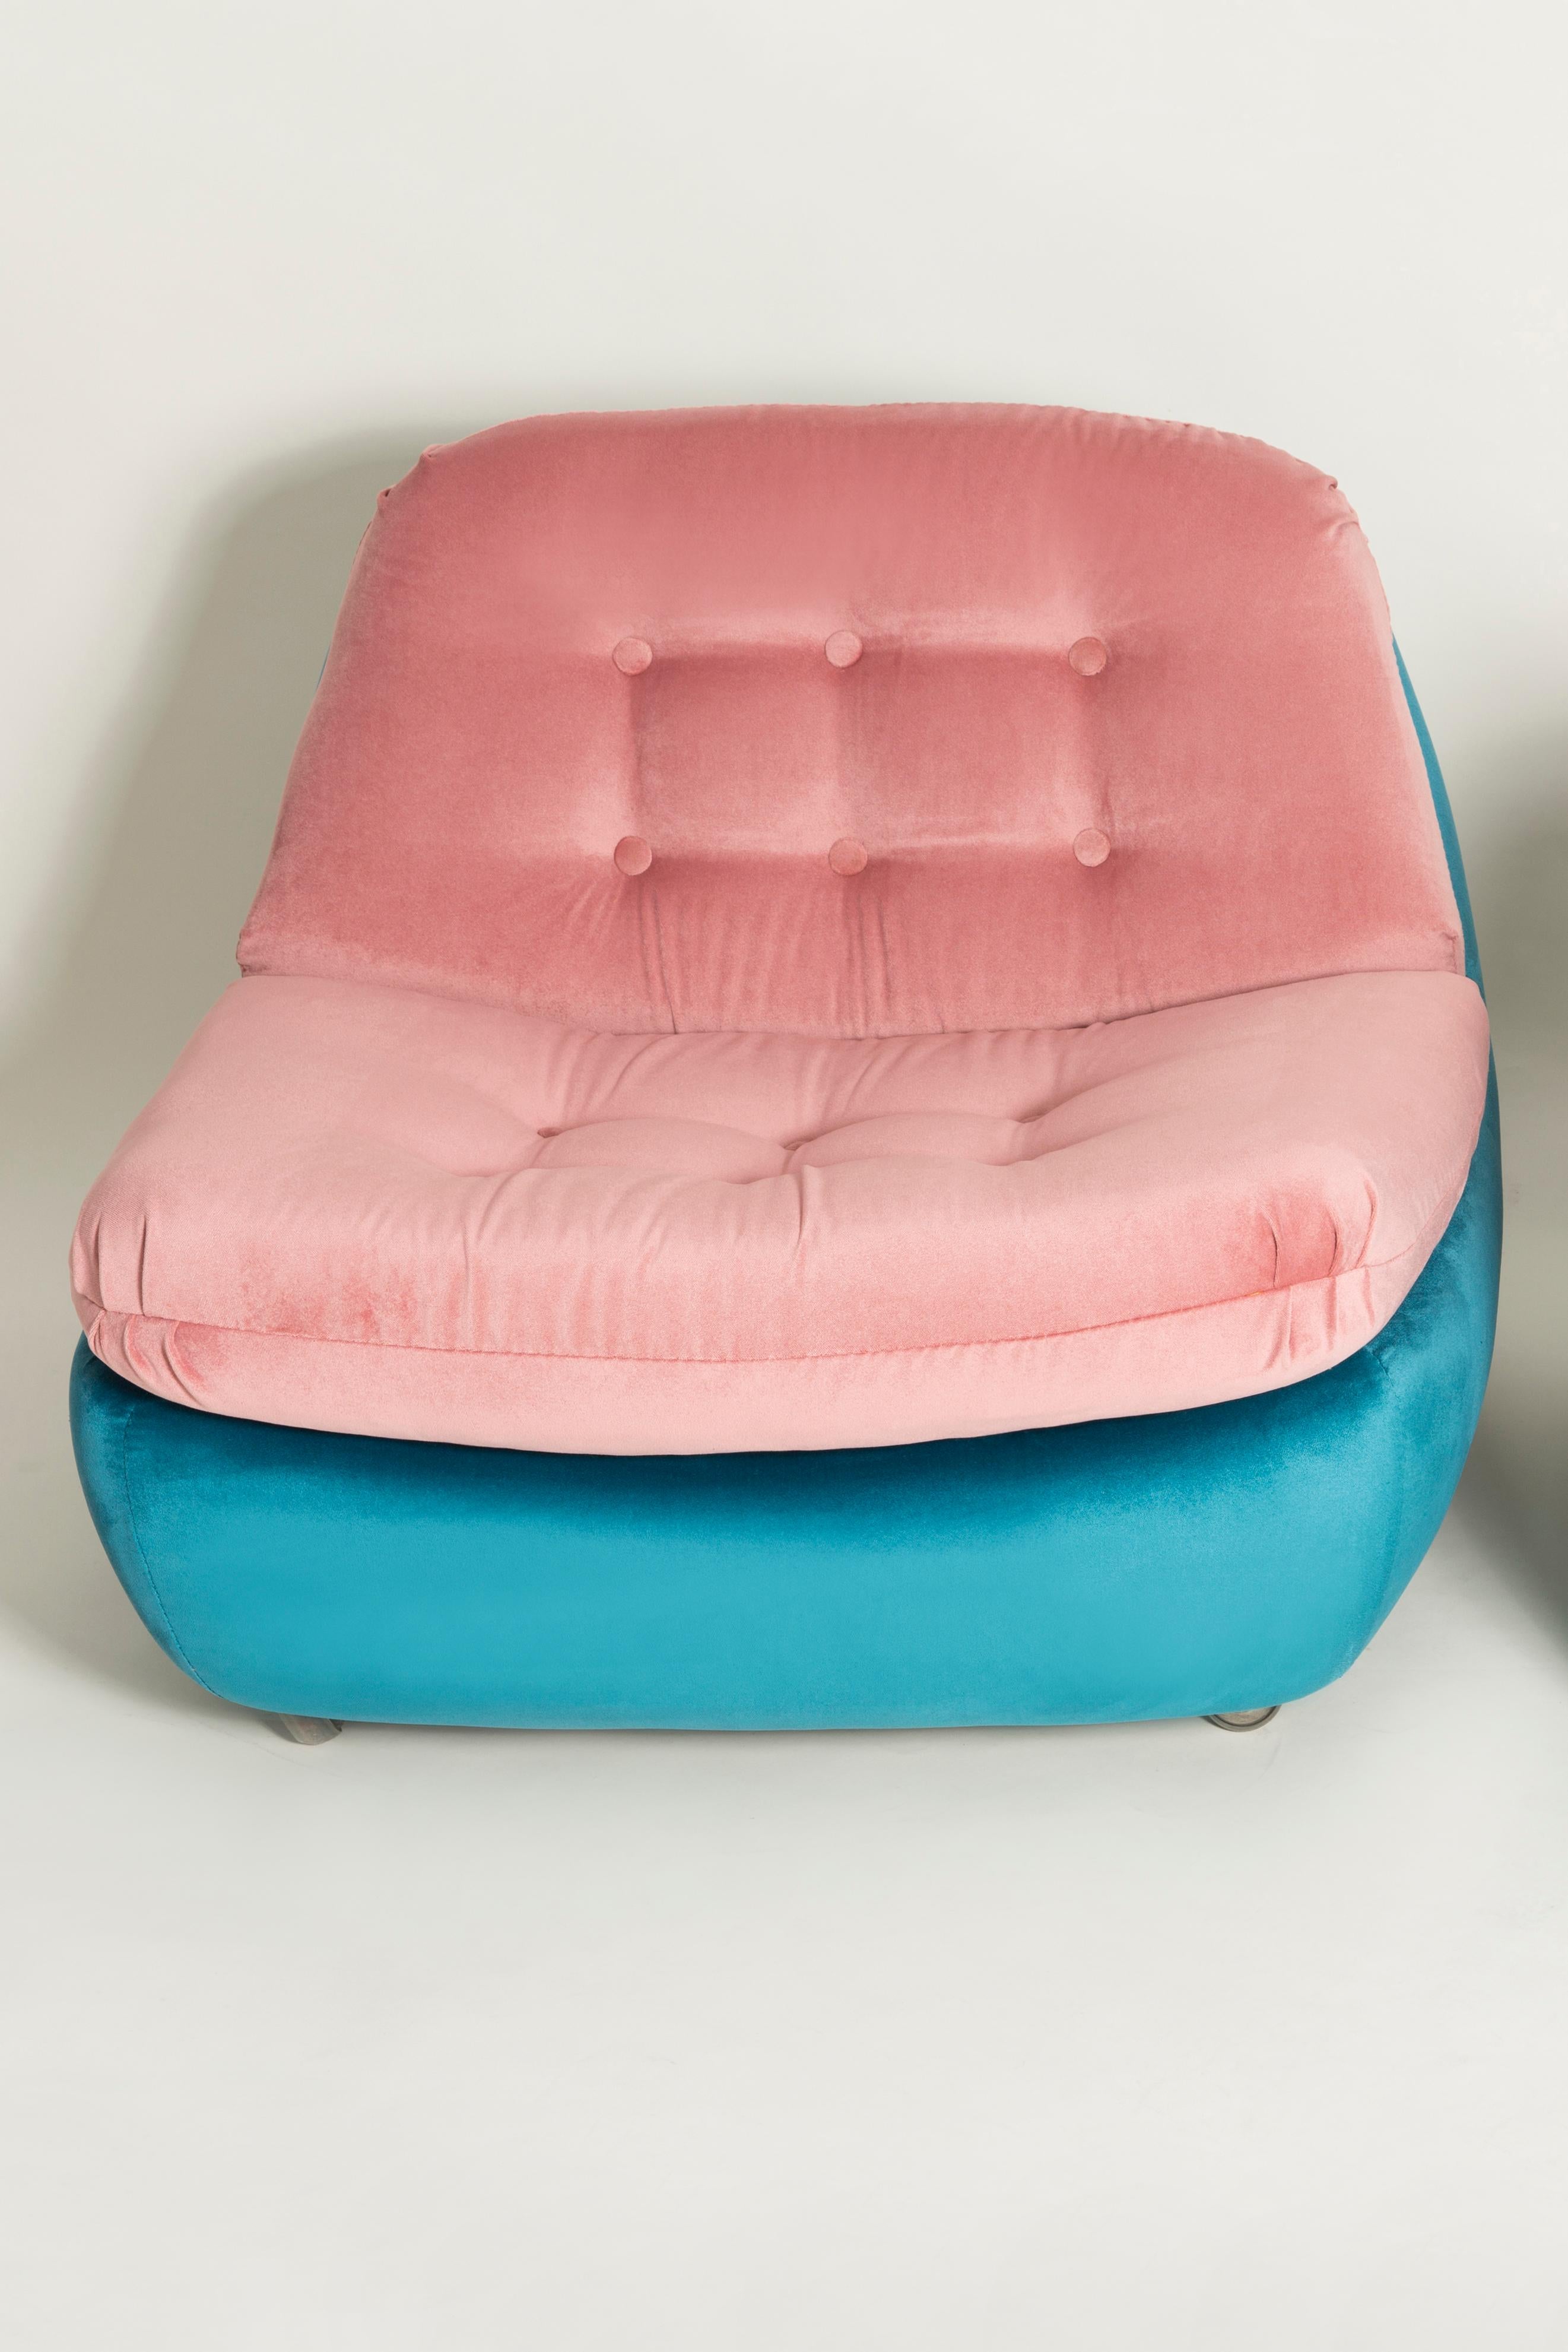 20th Century Vintage Pink and Blue Atlantis Armchair, 1960s For Sale 1